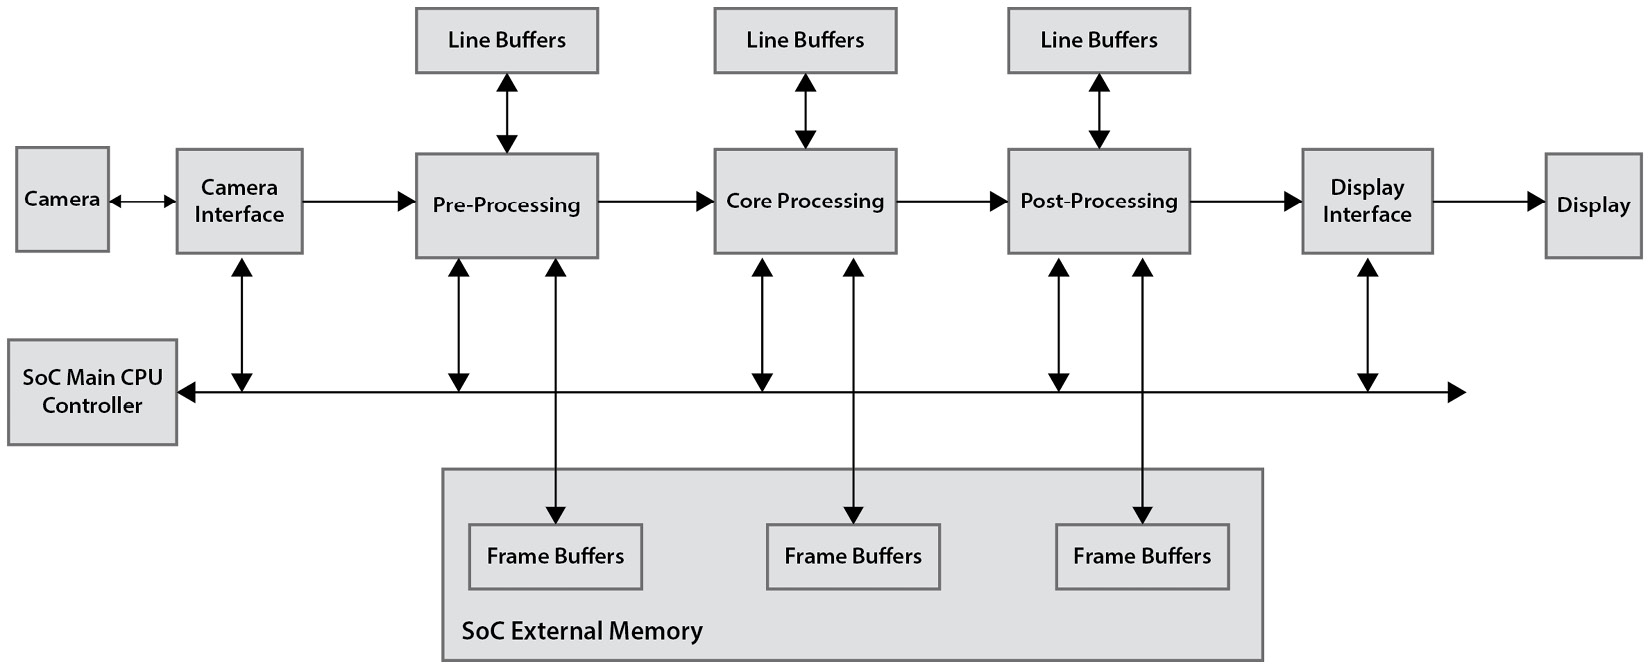 Figure 13.8 – Typical digital video processing system pipelined architecture
